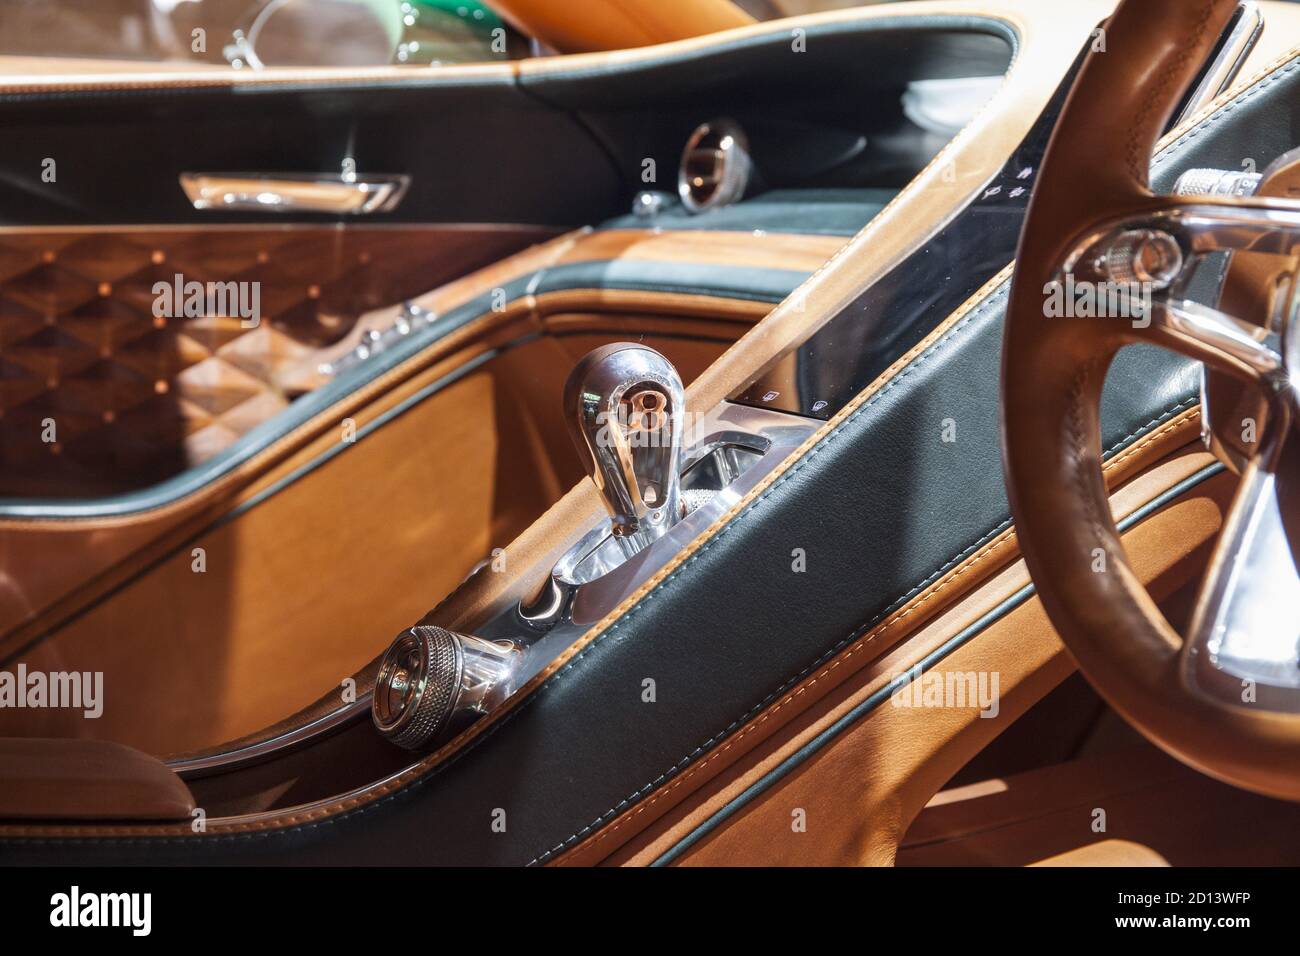 The New Bentley Exp 10 Speed 6 Concept At The Geneva Motor Show 15 5th March 15 Stock Photo Alamy